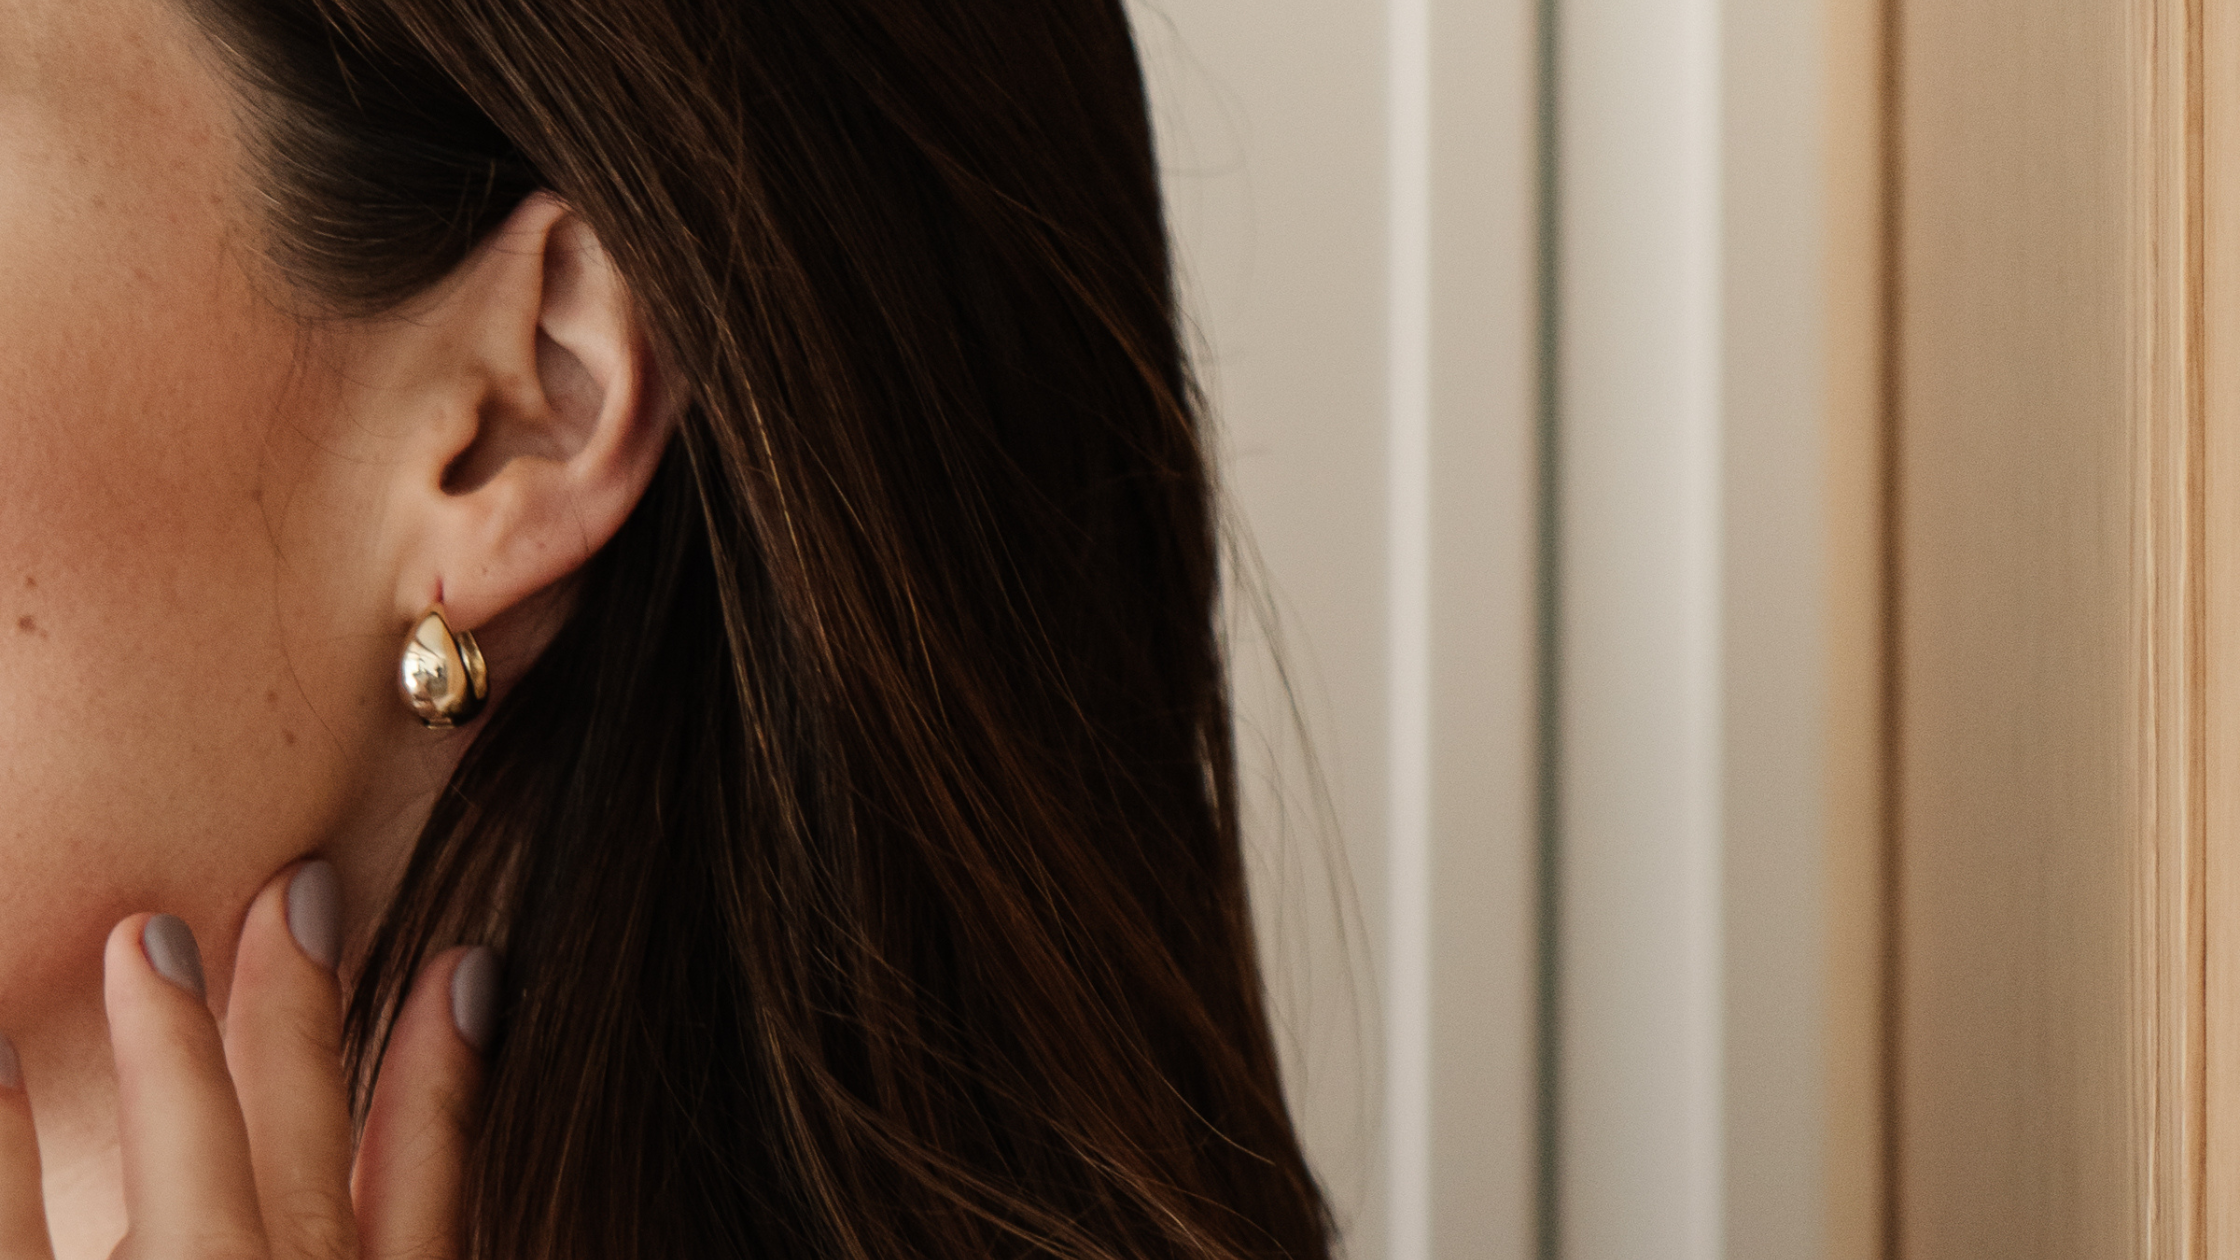 A Simple Process for Creating Your Strategic Vision as a Founder | Cropped image of woman's earring